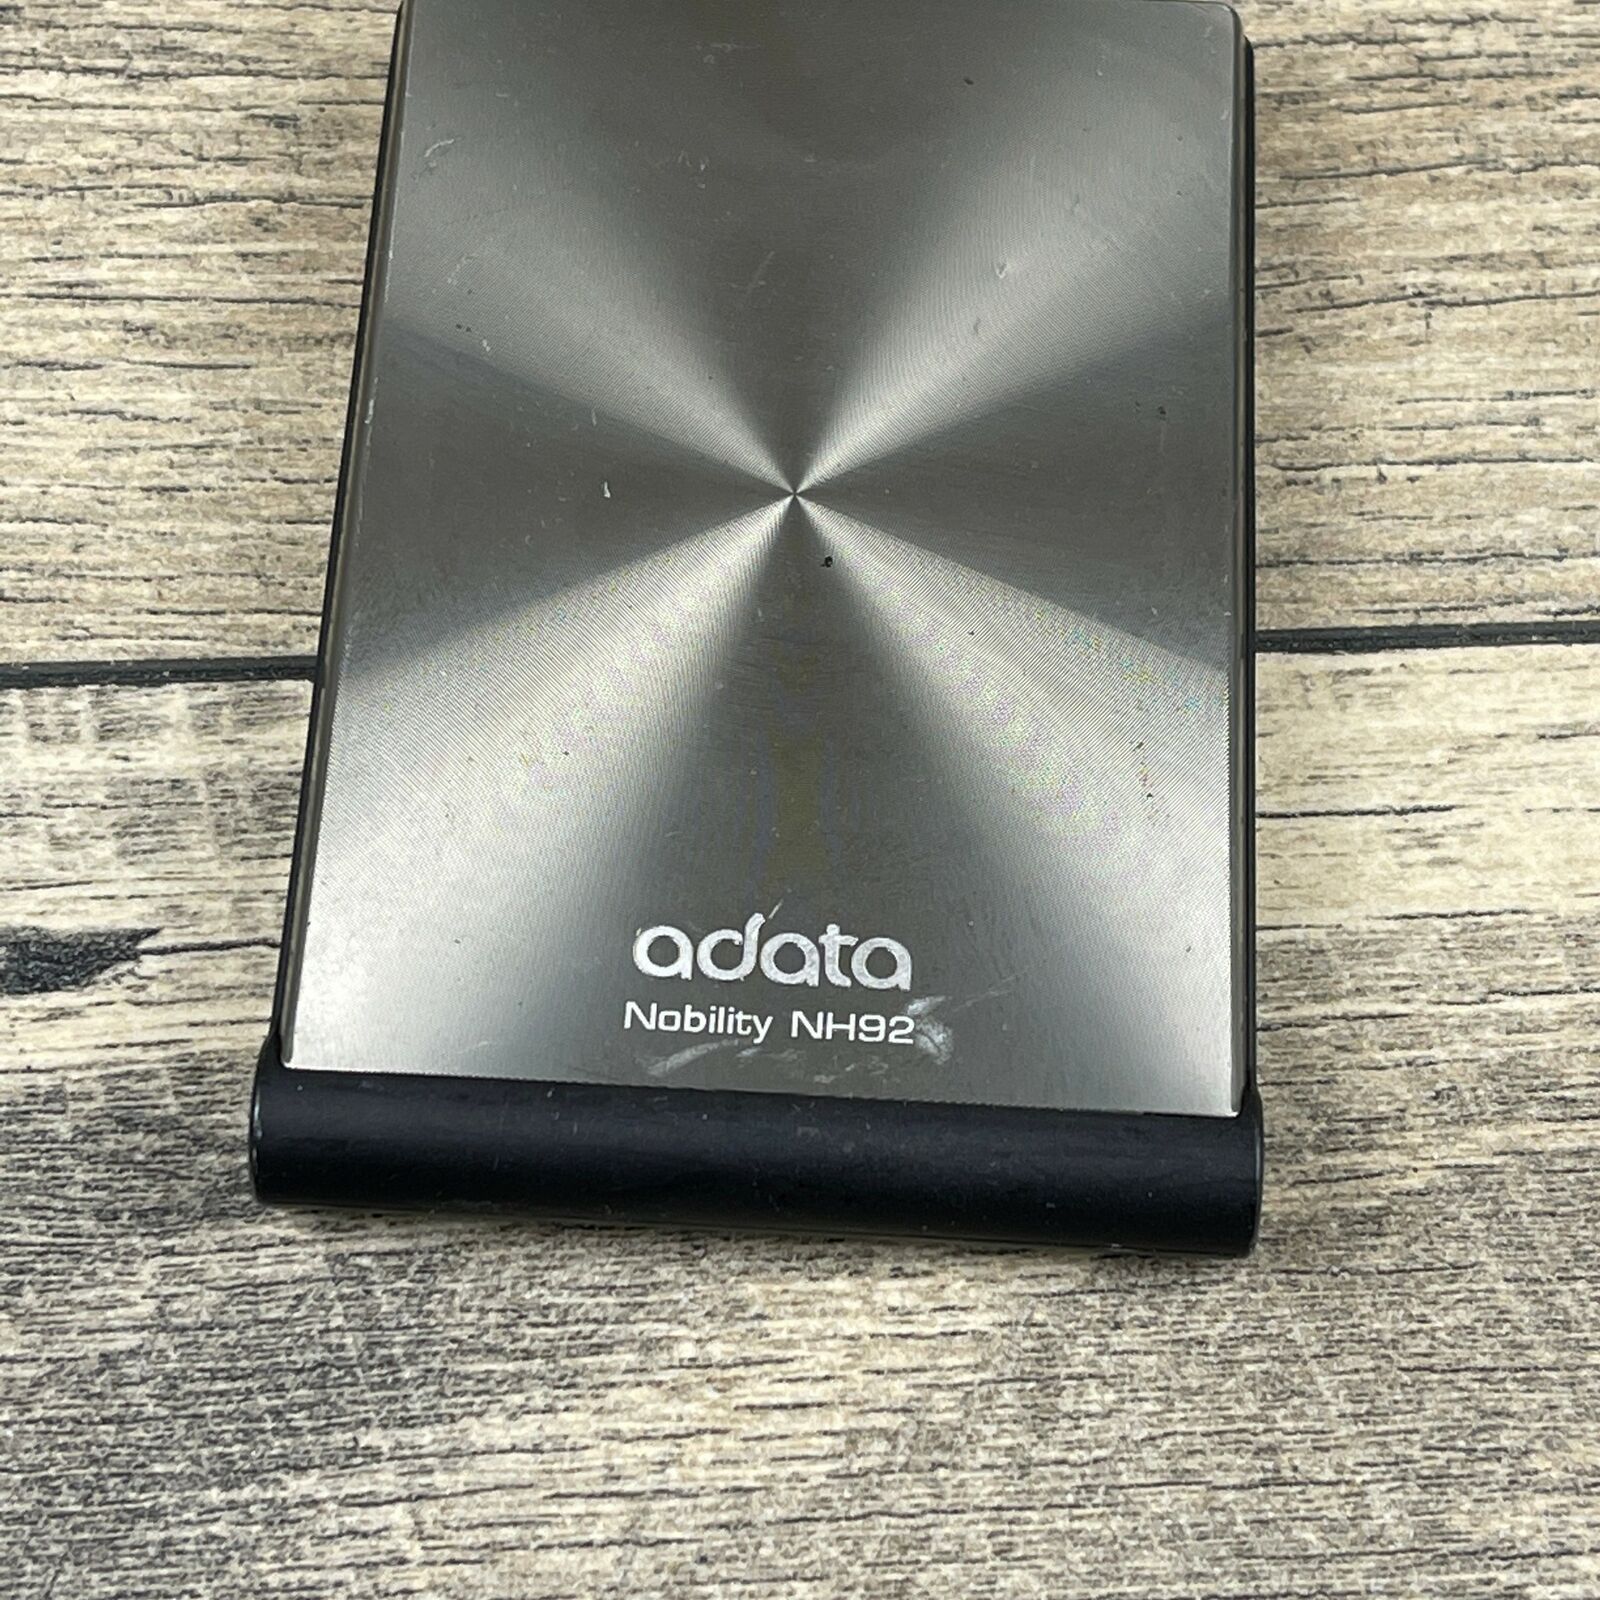 Adata Nobility NH92 Silver USB Powered 2.5in Portable External Hard Disk Drive